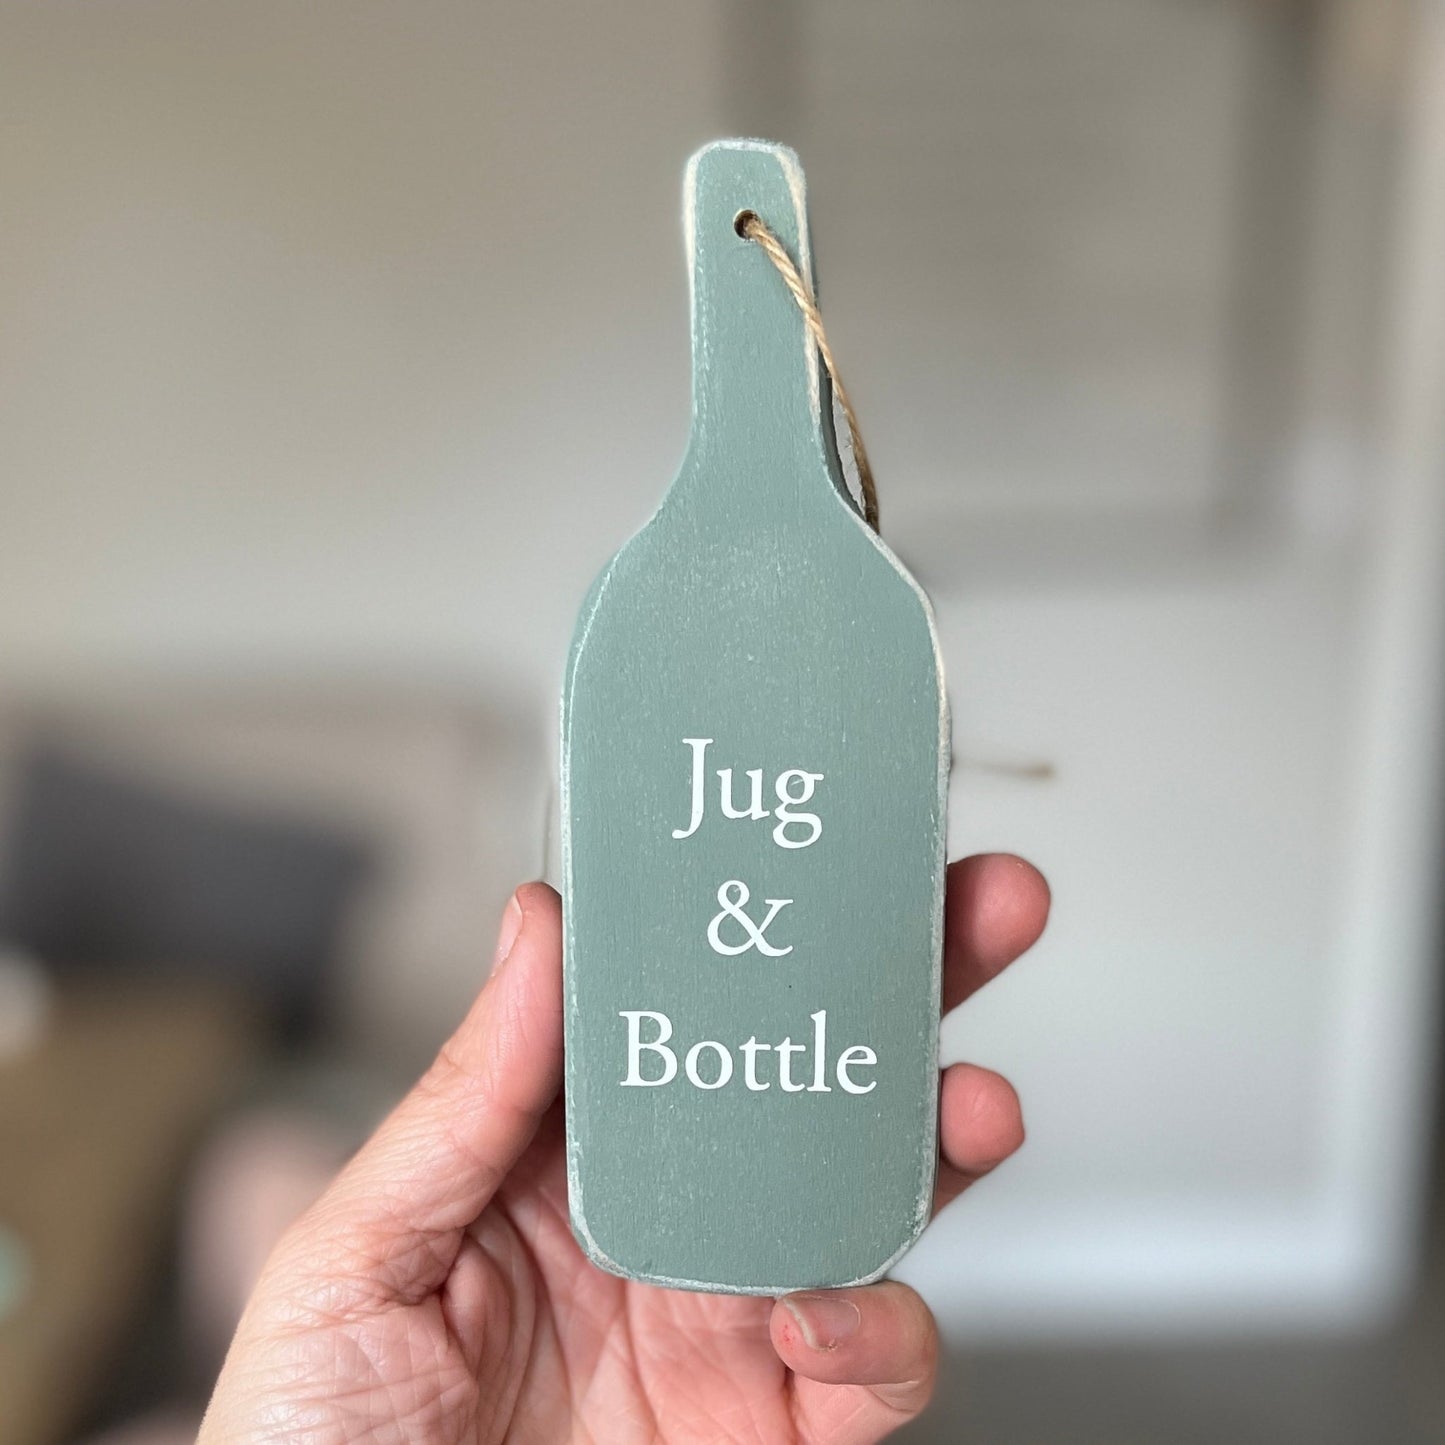 Bottle | Personalised Wooden Shape - The Imperfect Wood Company - Personalised Wood Shape